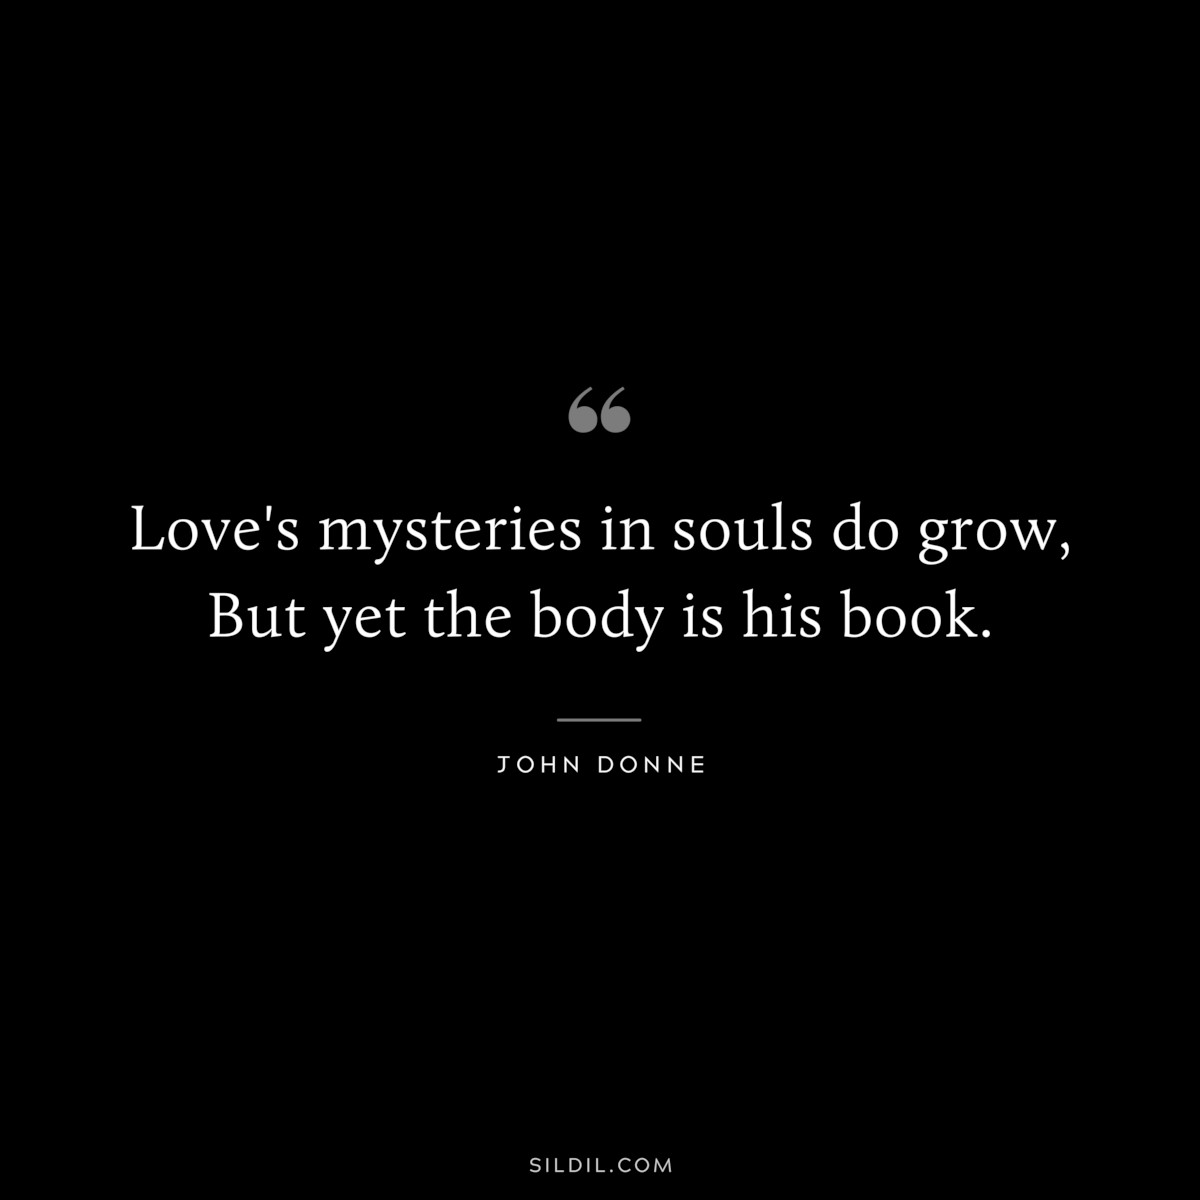 Love's mysteries in souls do grow, But yet the body is his book. ― John Donne